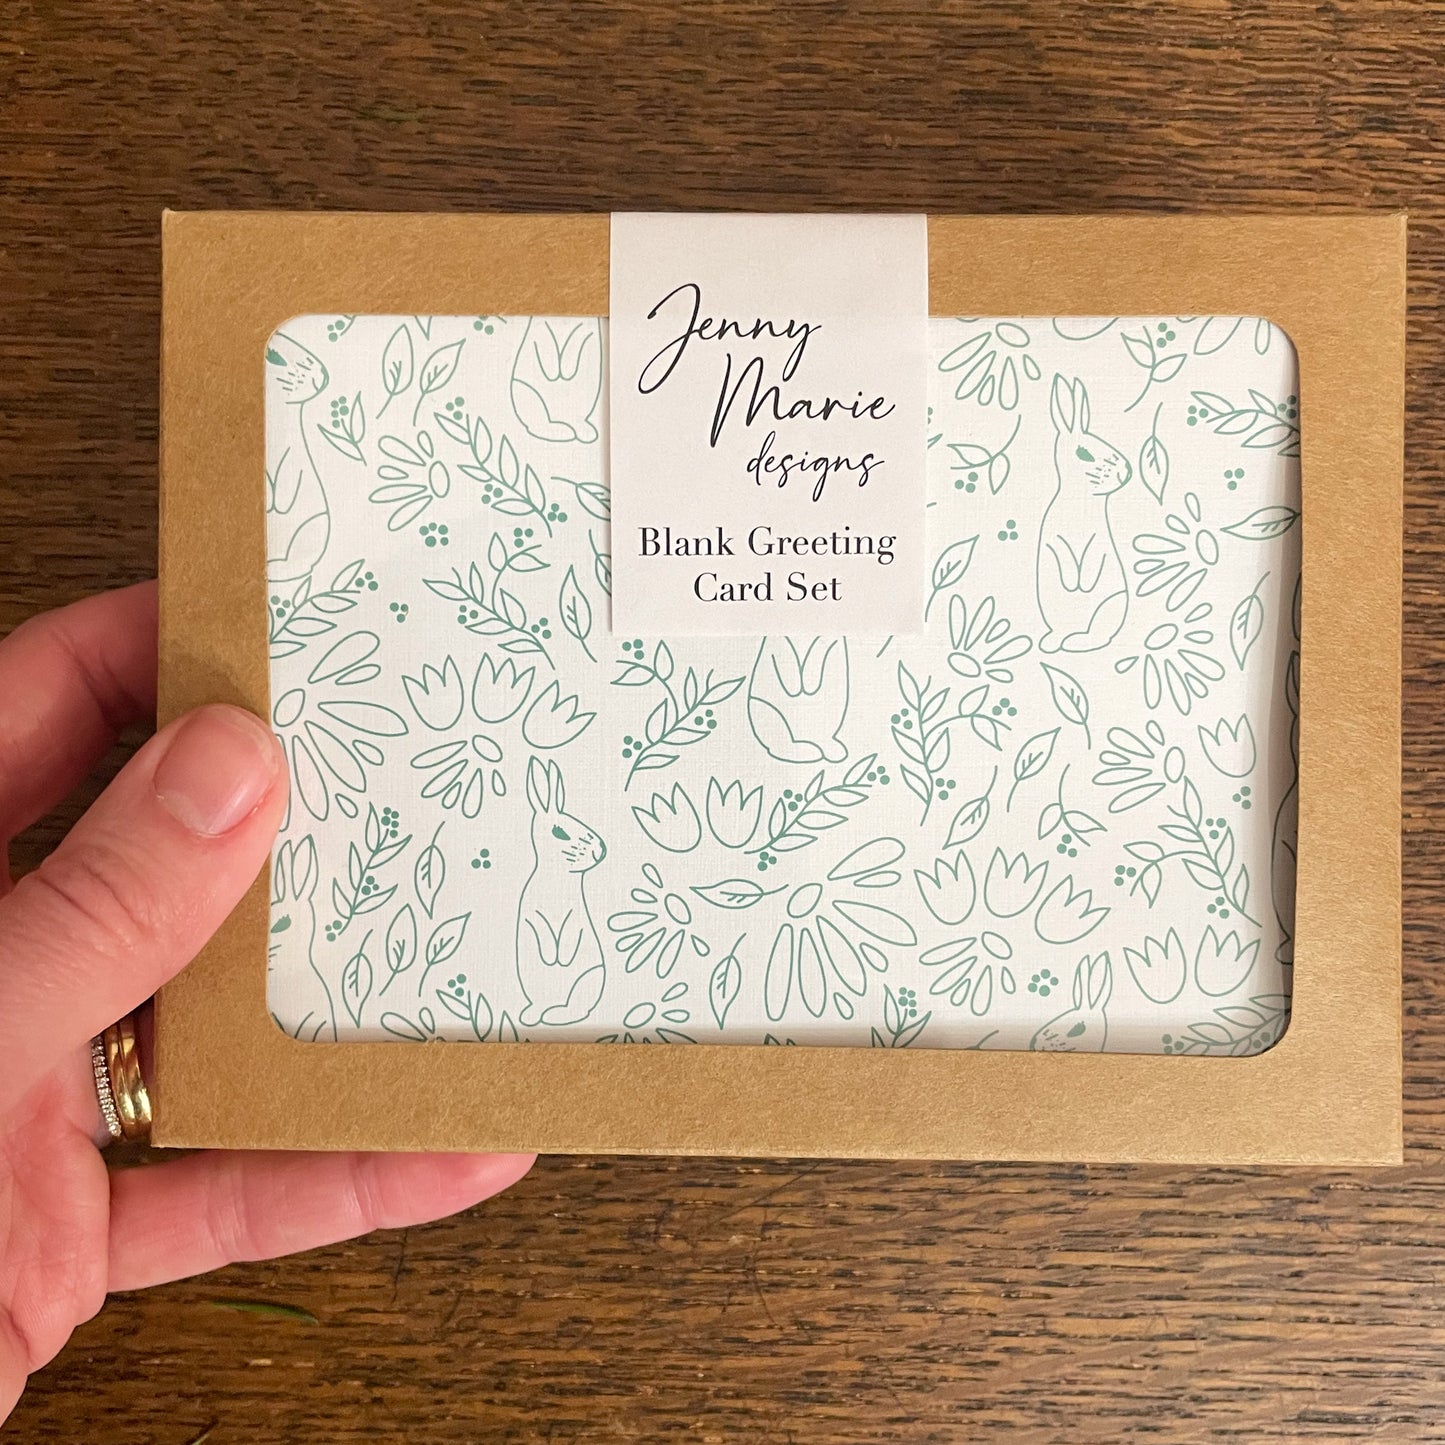 Photo of greeting card set inside of retail packaging being held in hand.